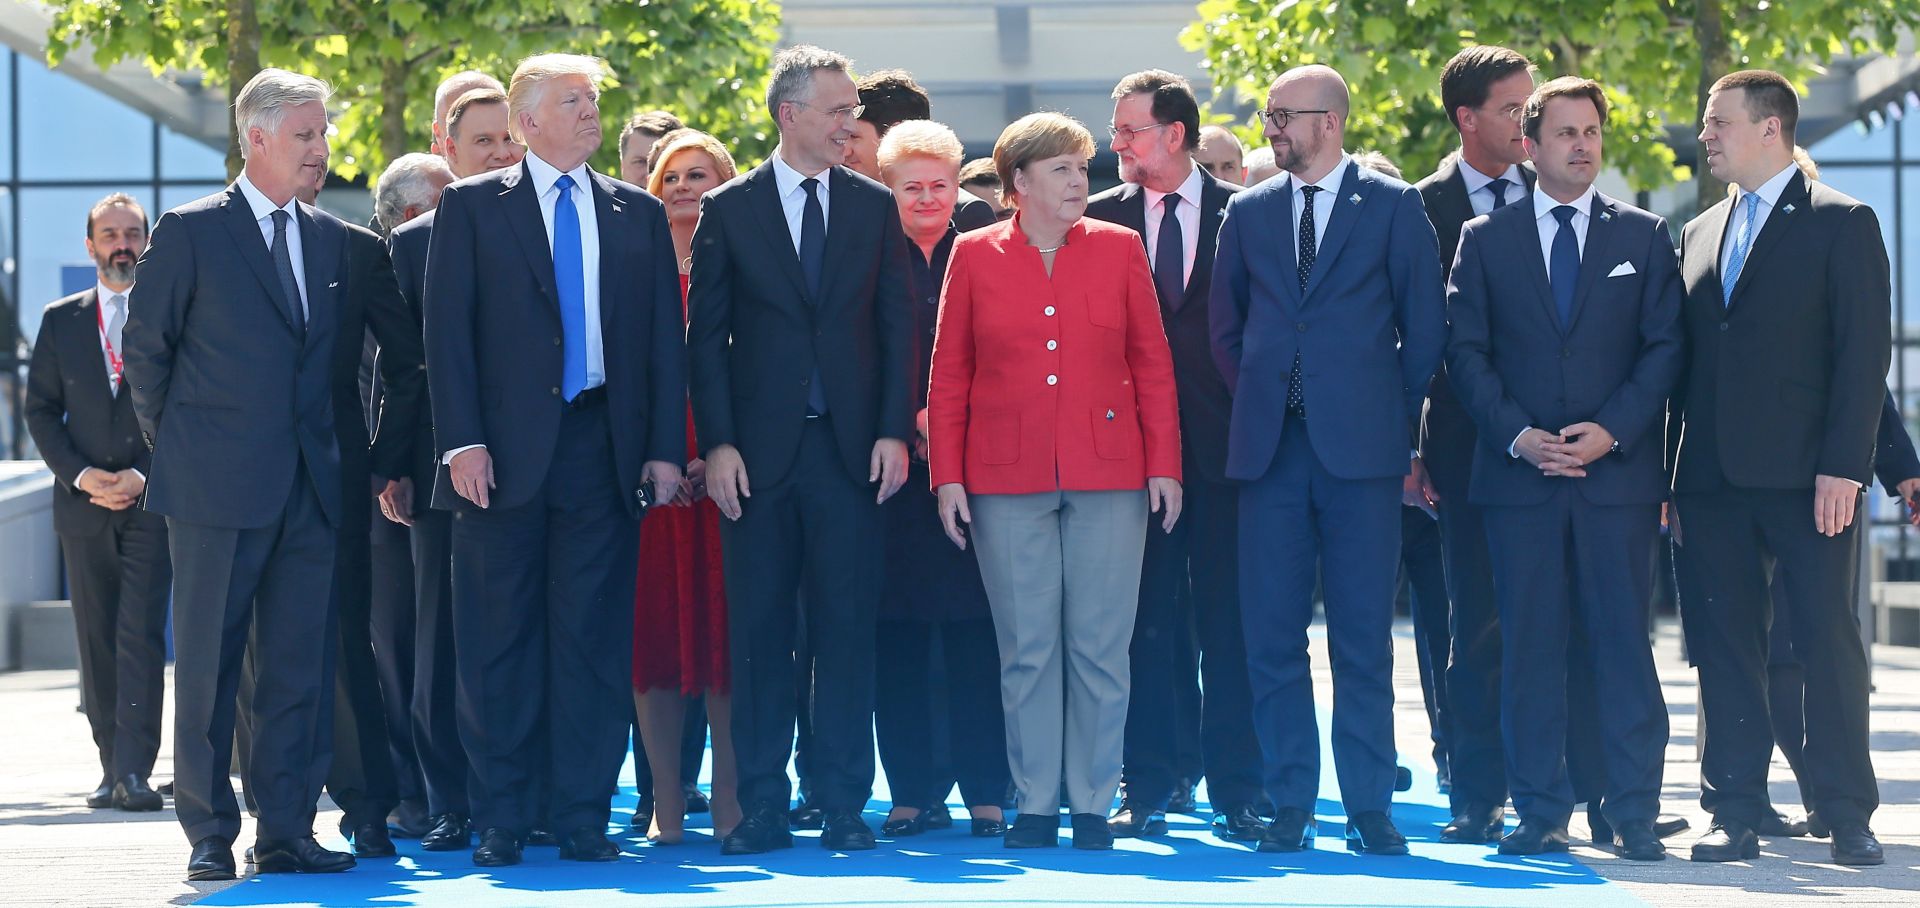 epa05989719 (front L-R) Belgian King Philippe, US President Donald J. Trump, NATO Secretary General Jens Stoltenberg, German Chancellor Angela Merkel, Belgian Prime Minister Charles Michel, Luxembourg's Prime Minister Xavier Bettel, and Estonian Prime Minister Juri Ratas walk with fellow dignitaries during the unveiling of a monument at the new NATO Headquarters during the NATO summit in Brussels, Belgium, 25 May 2017. NATO countries' heads of states and governments gather in Brussels for a one-day meeting.  EPA/STEPHANIE LECOCQ